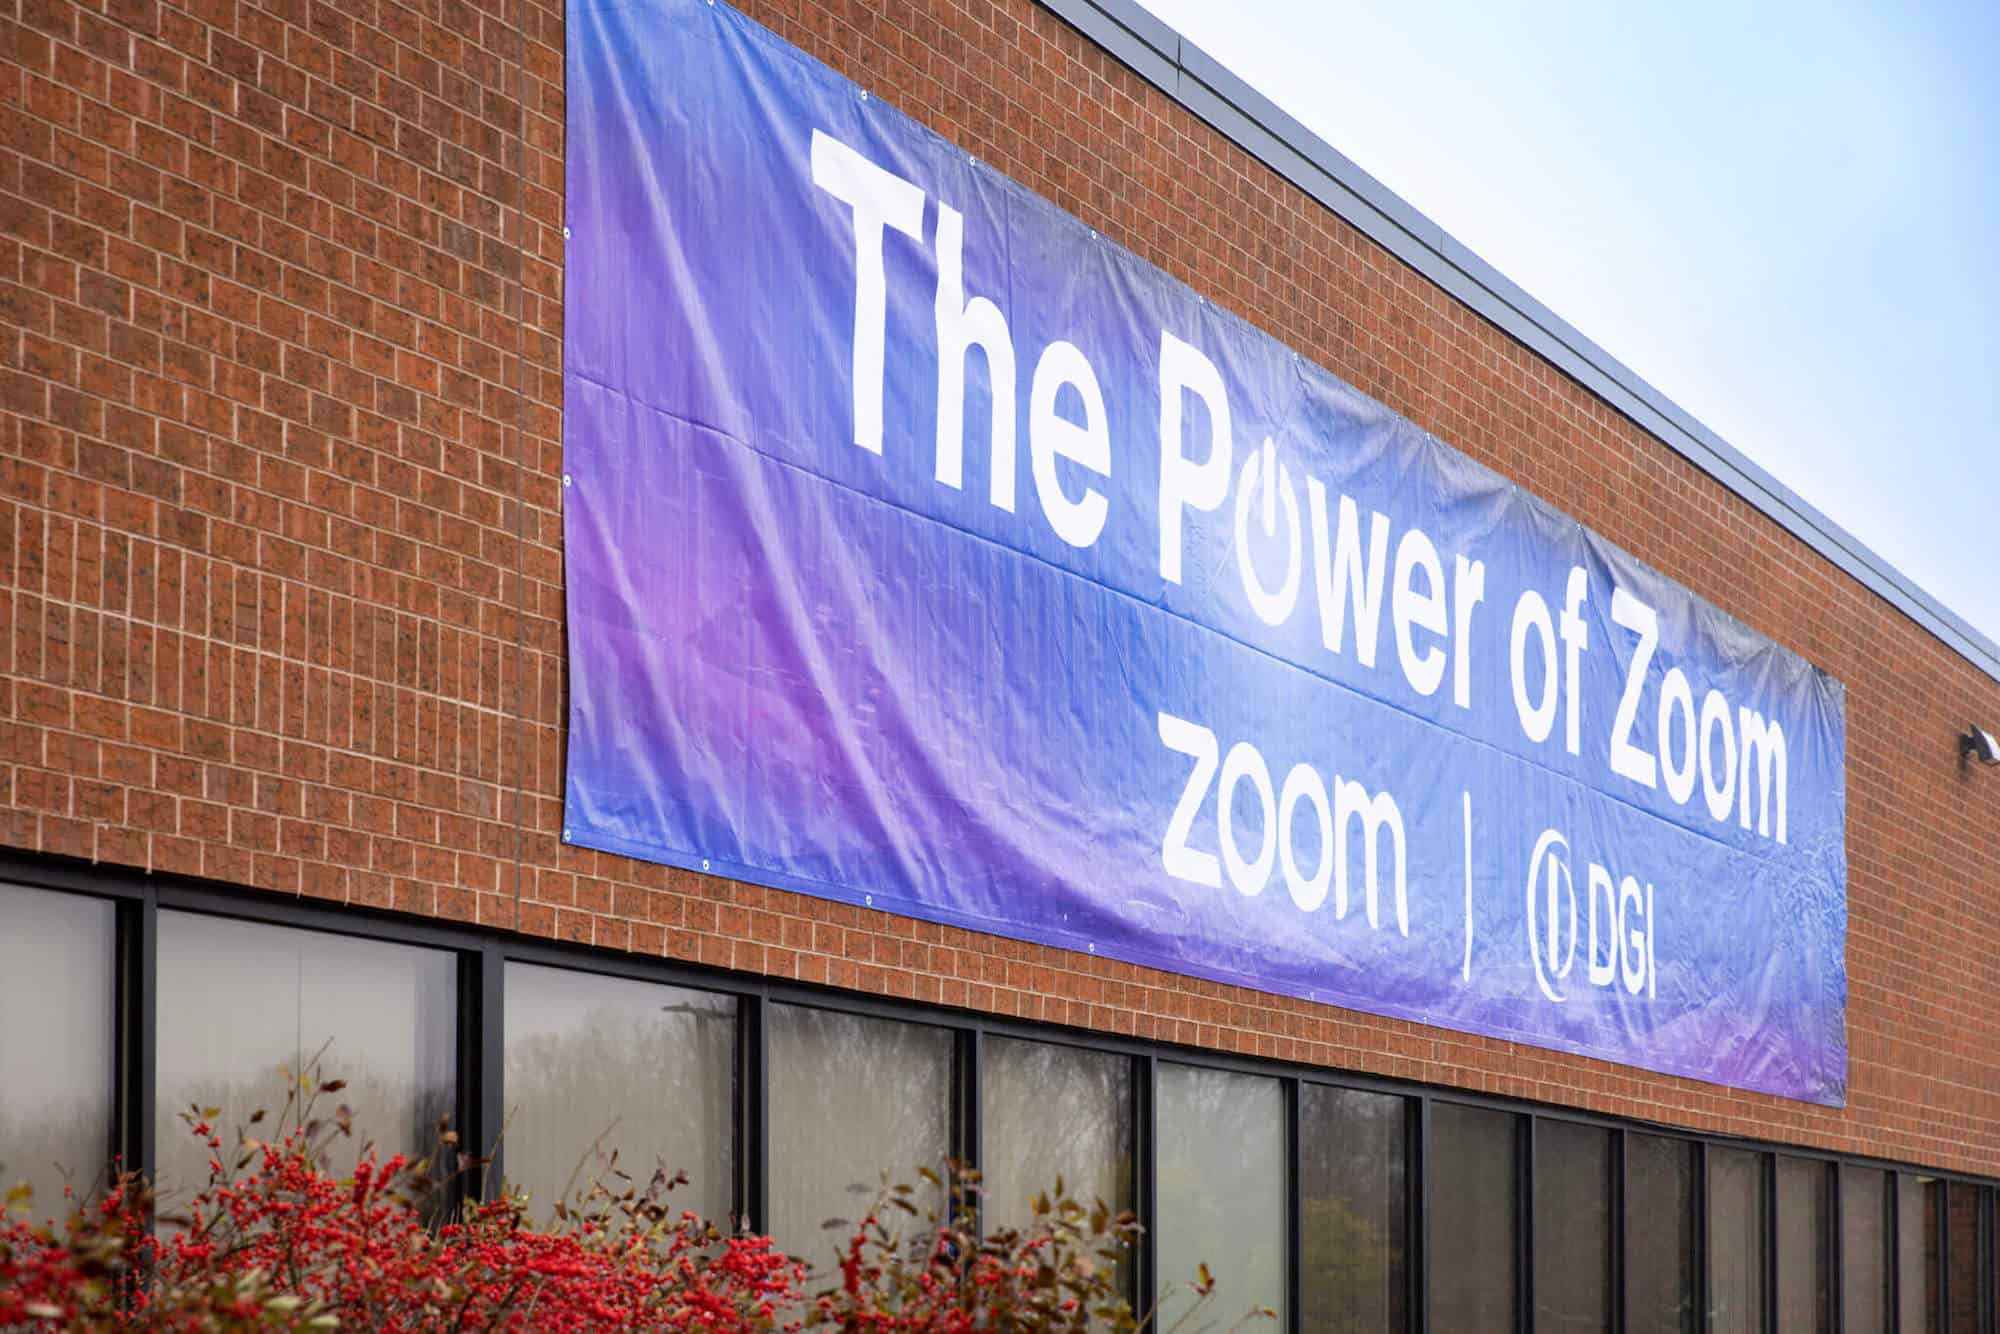 A blue trade show banner with white writing hanging above a row of windows on a brick building. The writing reads "The Power of Zoom."